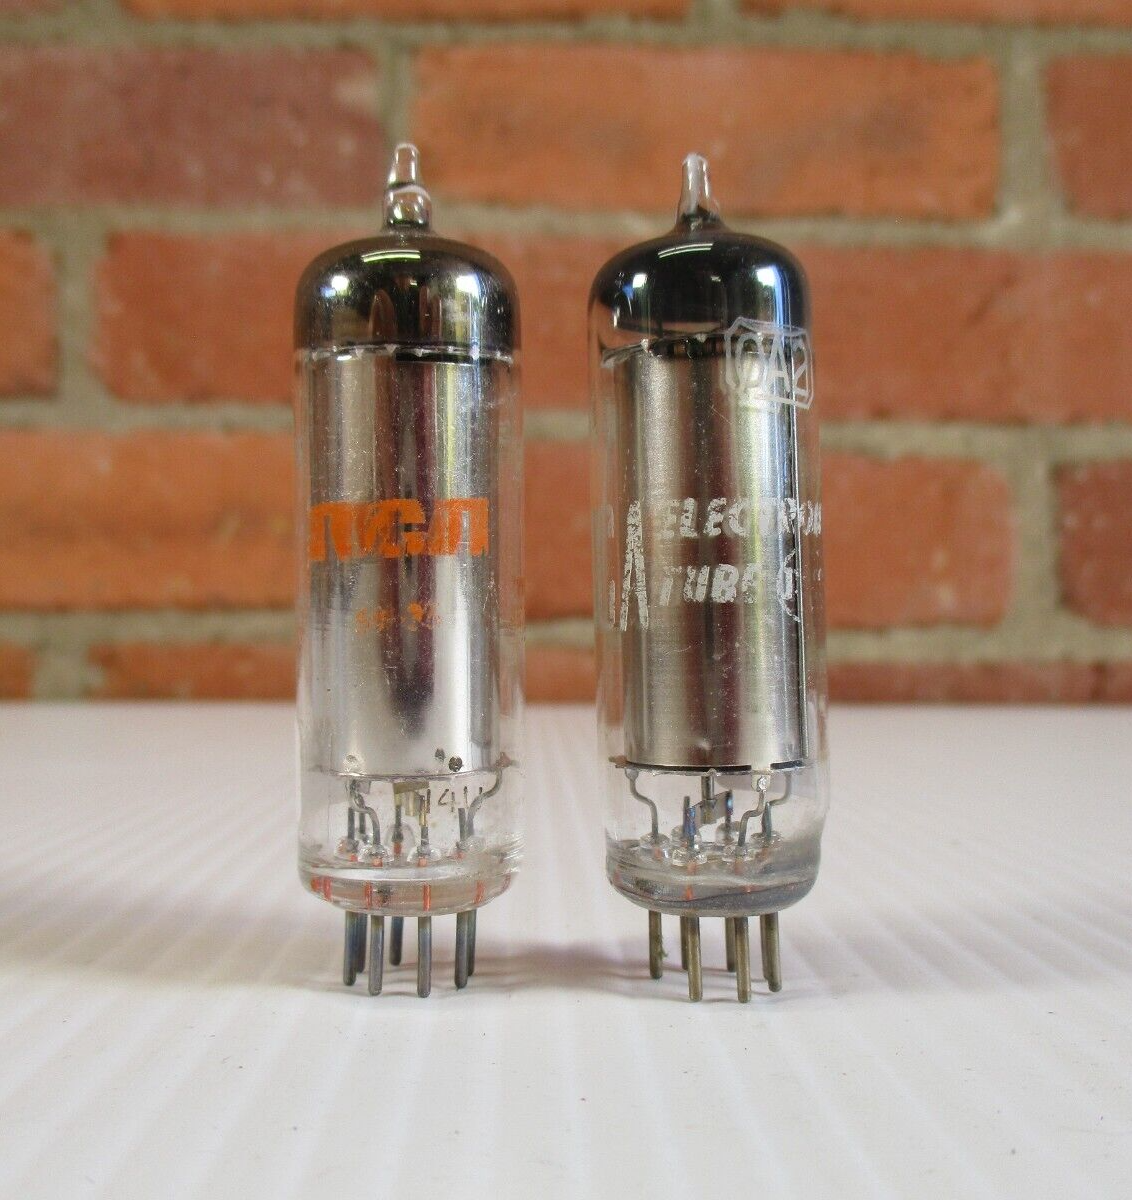 RCA JAN 0A2WA 0A2 Vacuum Tubes Voltage Regulator Tubes TV-7 Tested Strong - £6.78 GBP